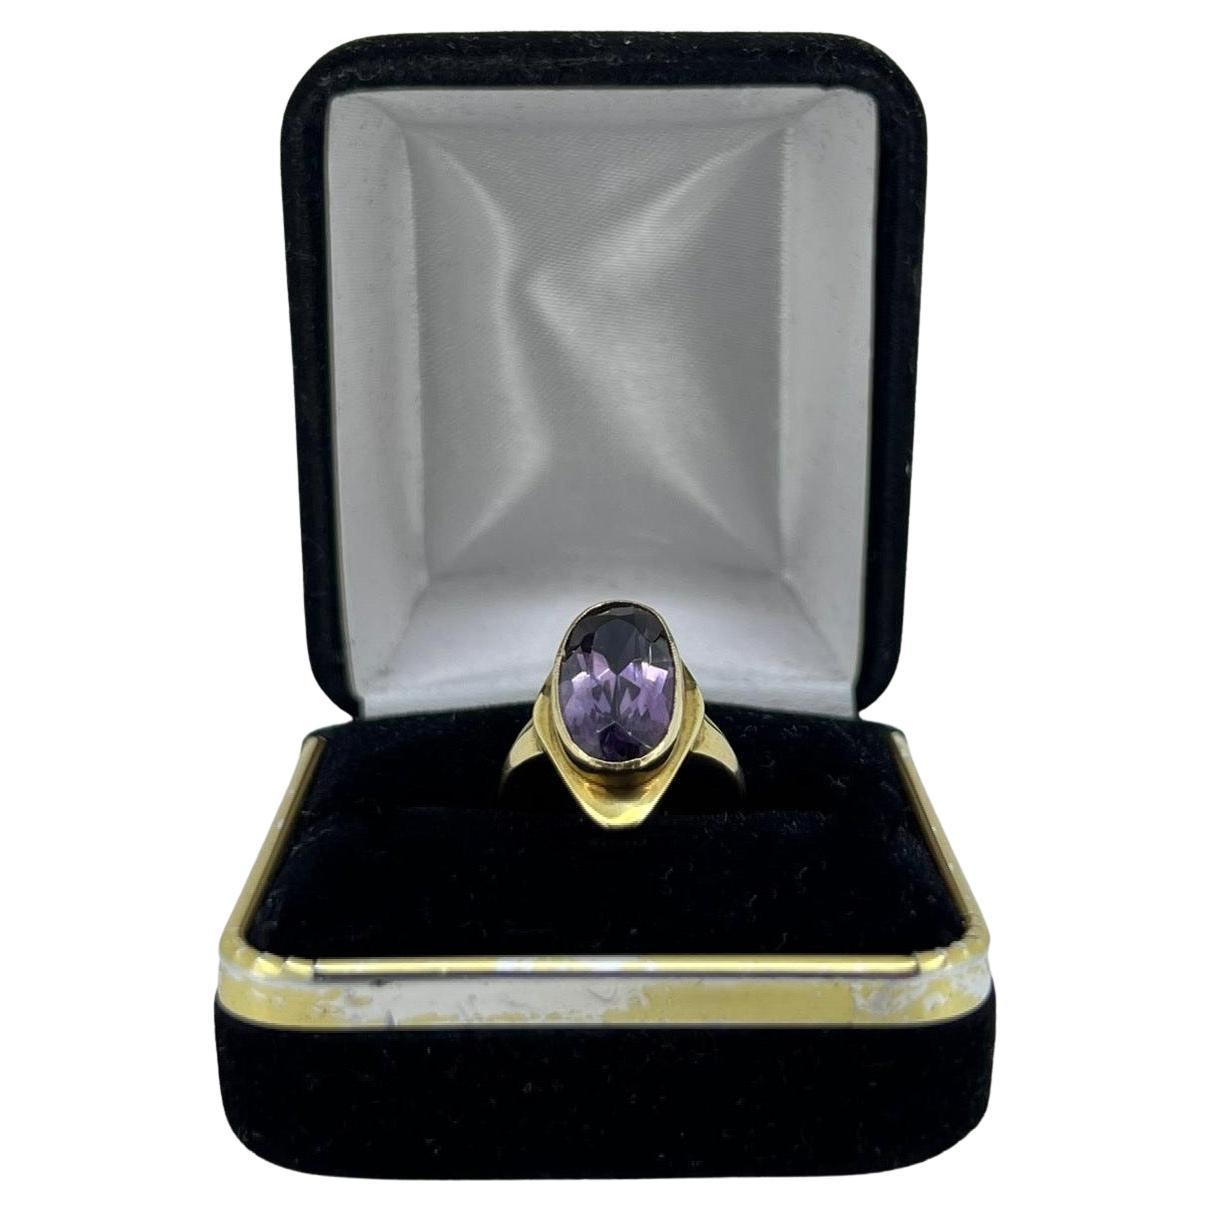 Oval Cut 3.00ct Royal Purple Amethyst Ring in 9K Yellow Gold, c1964, English Hallmarks. For Sale